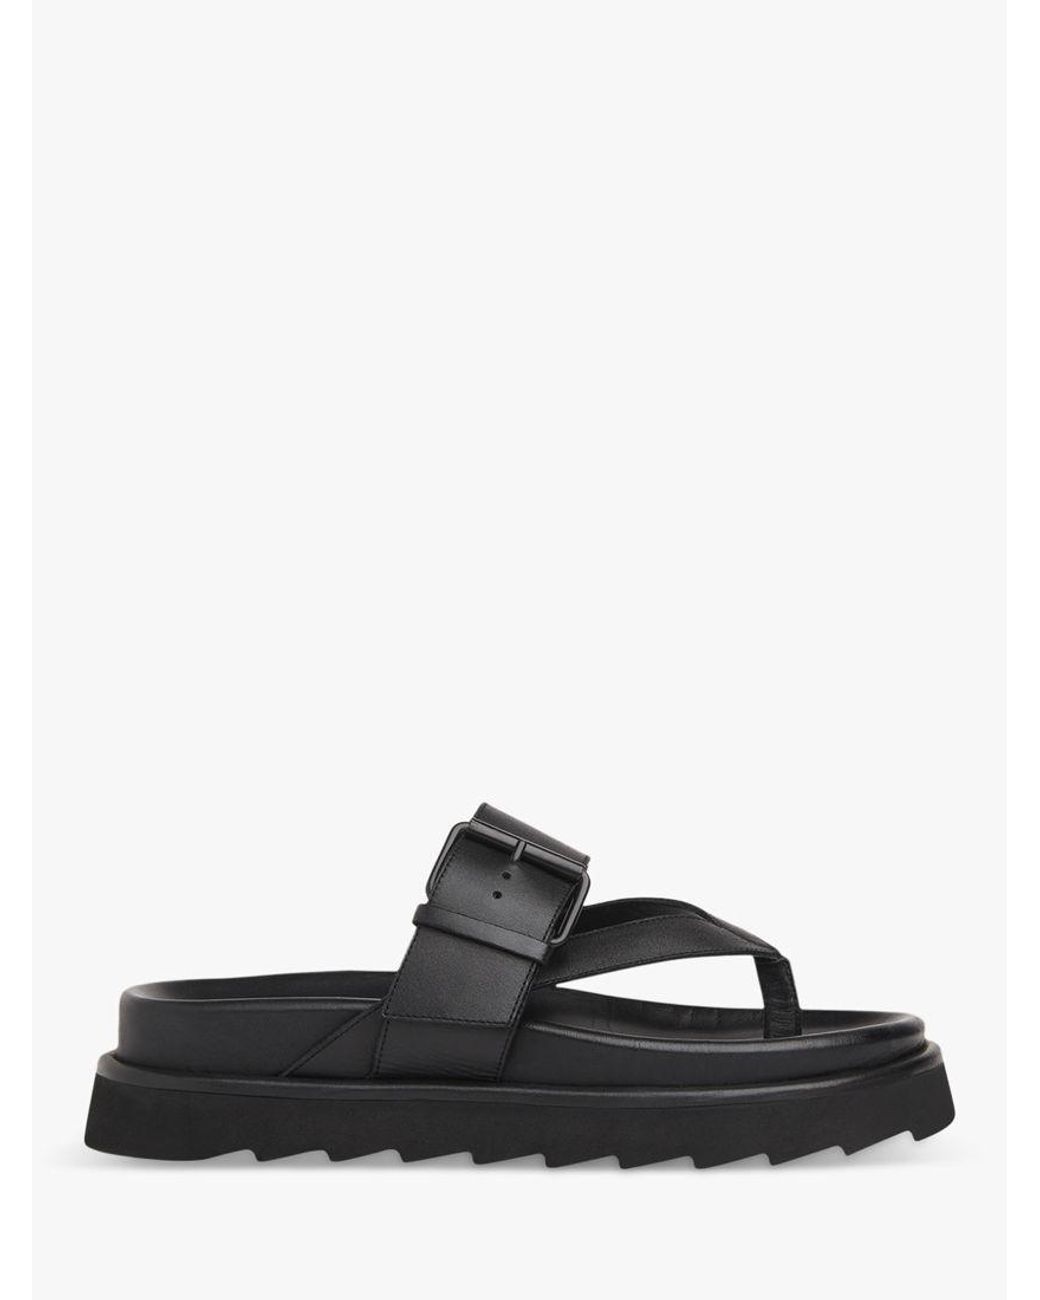 Whistles Sutton Toe Post Buckle Leather Slider Sandals in Black | Lyst UK